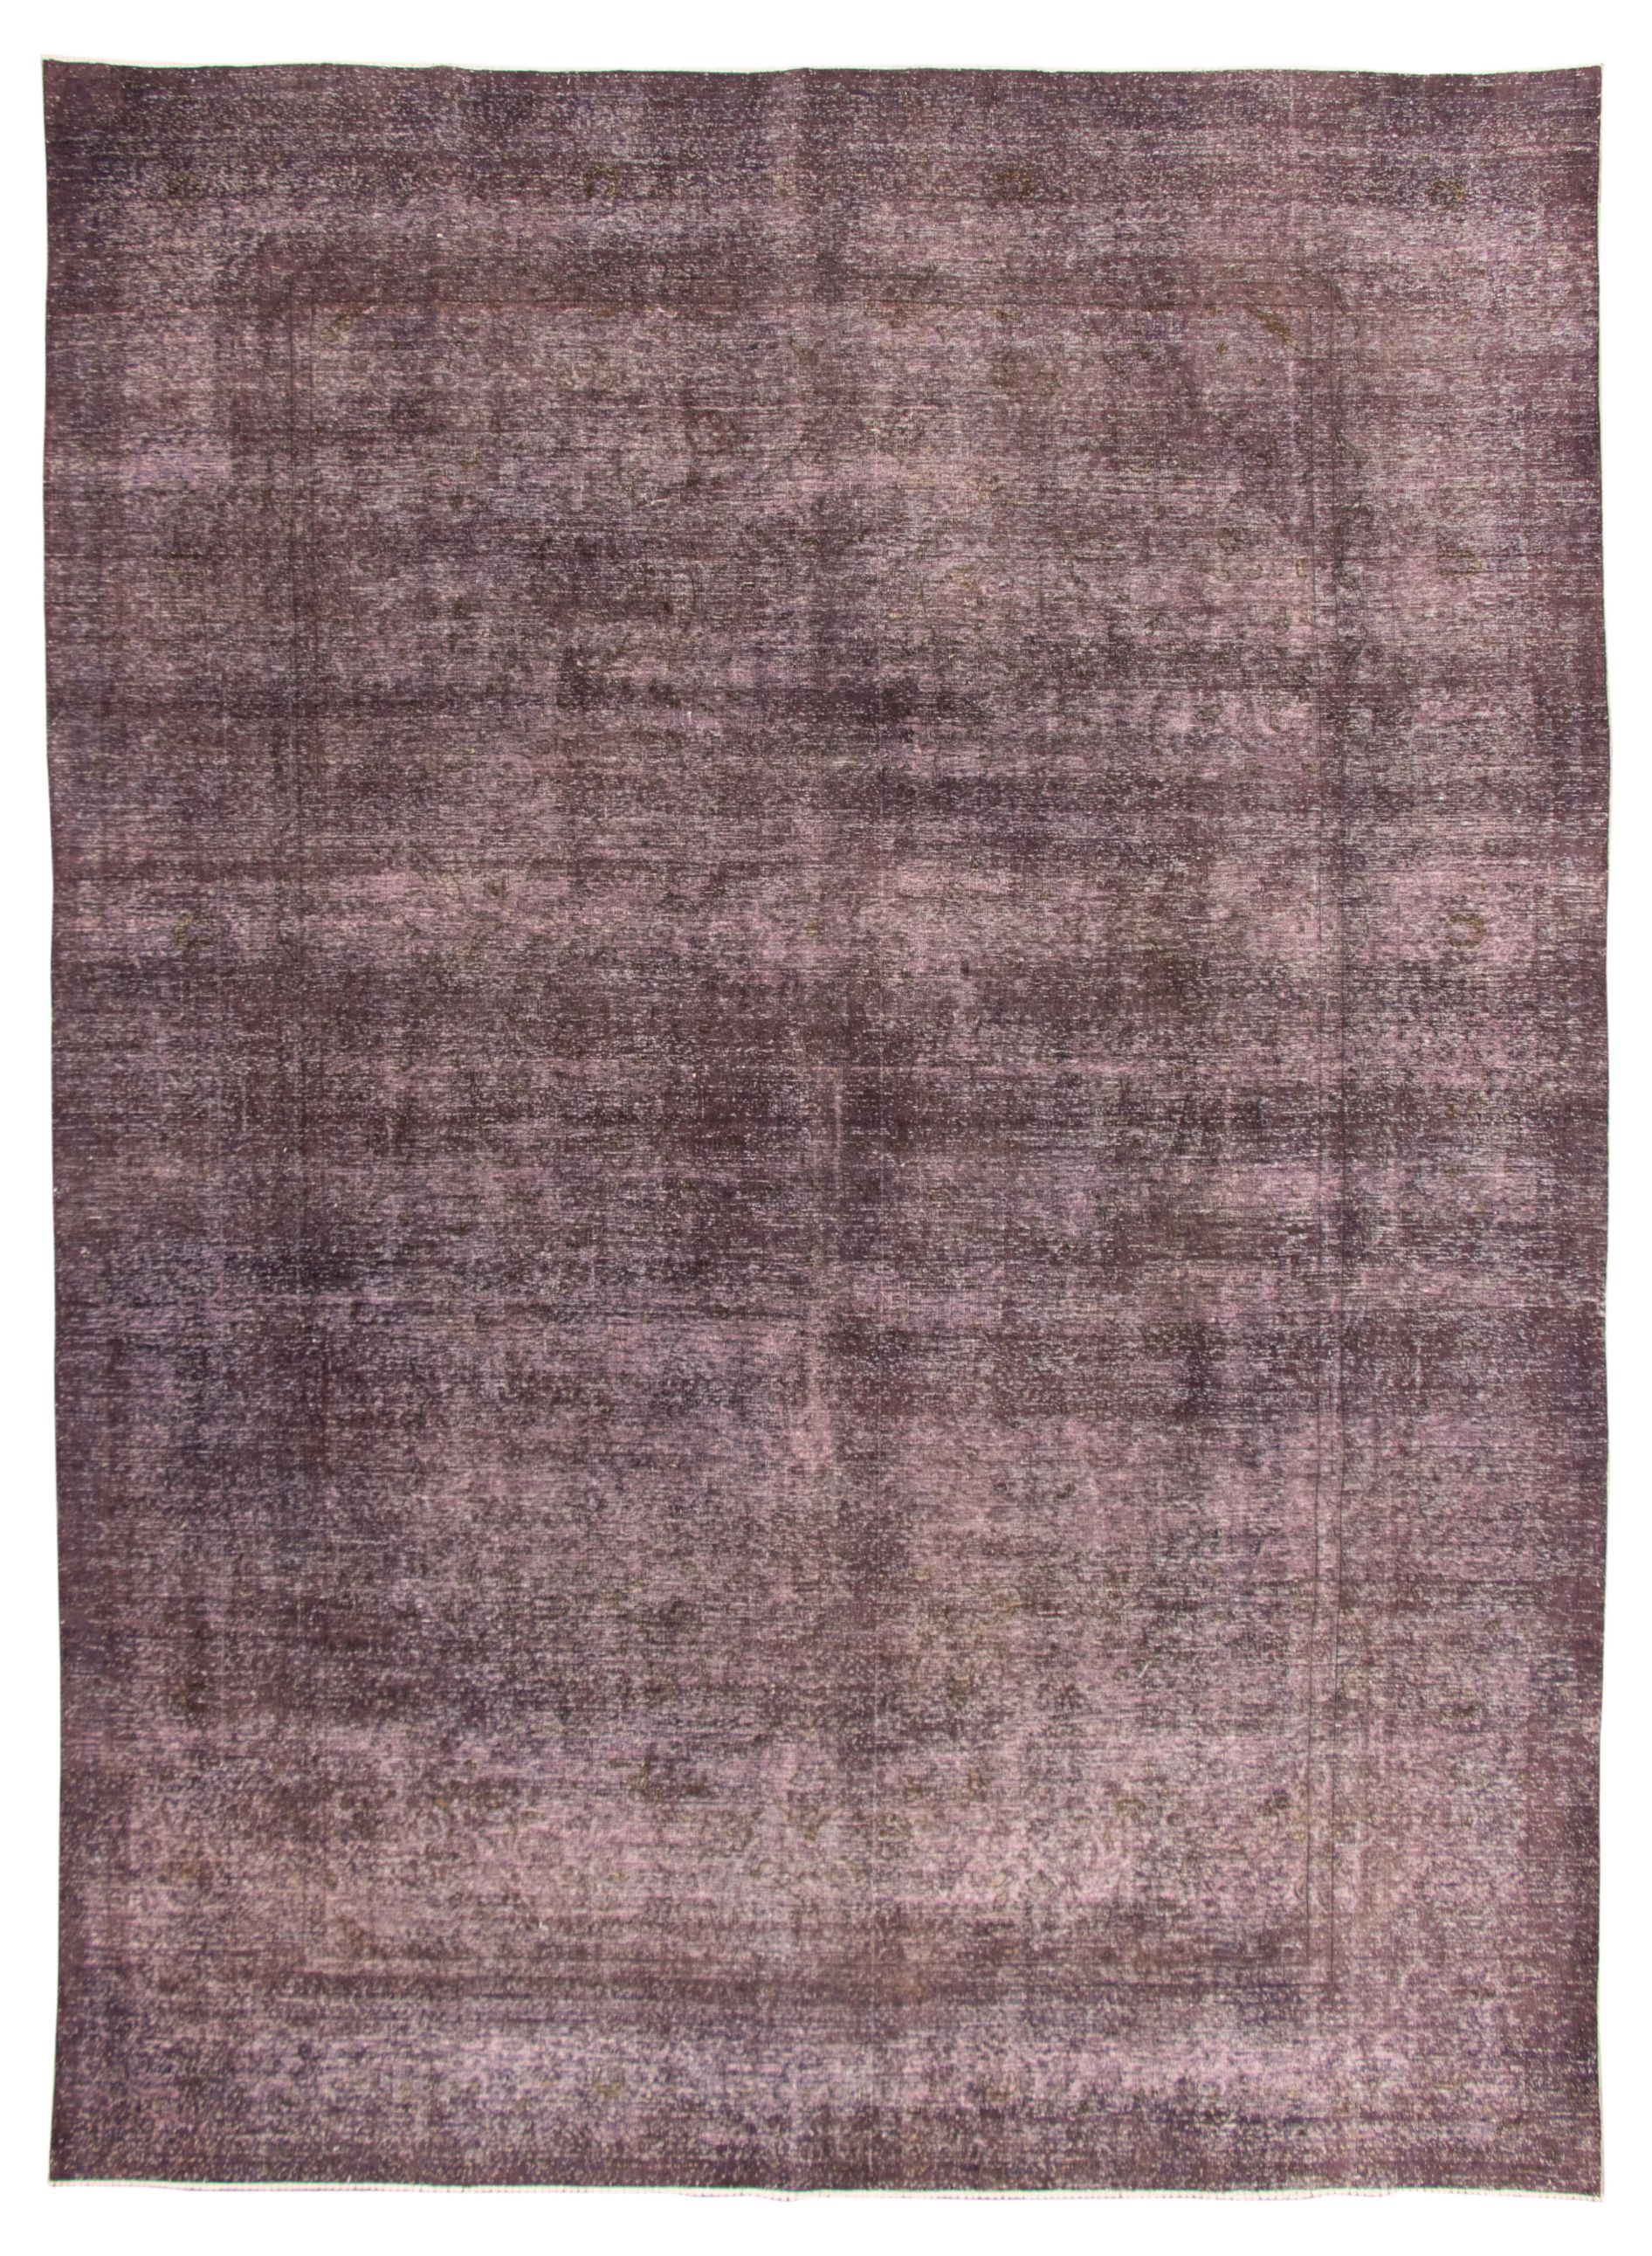 Hand-knotted Color Transition Burgundy Wool Rug 9'7" x 13'0" Size: 9'7" x 13'0"  